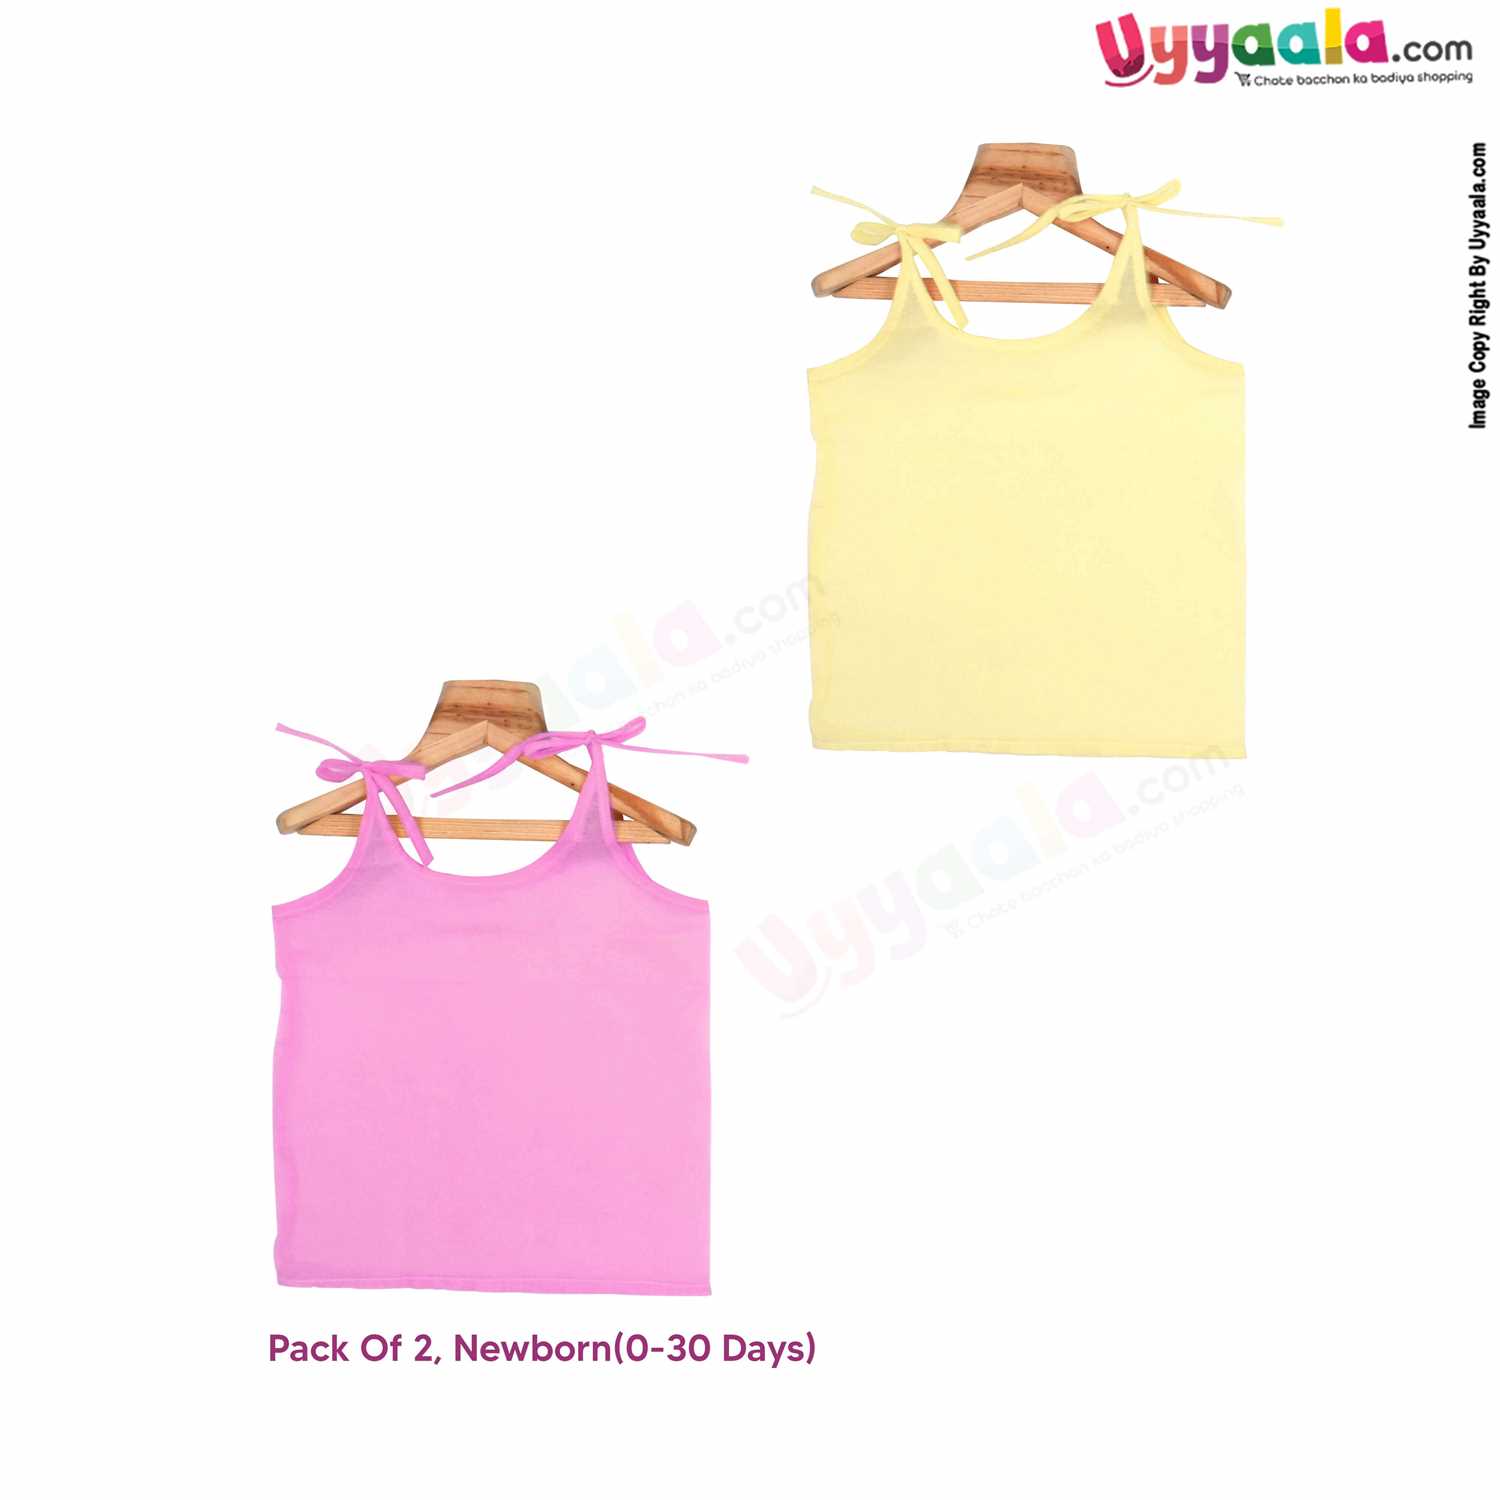 SNUG UP Sleeveless Baby Jabla Set, Top Opening Tie knot Lace Model, Premium Quality Cotton Baby Wear, (0-30 Days), 2Pack - Pink & Yellow